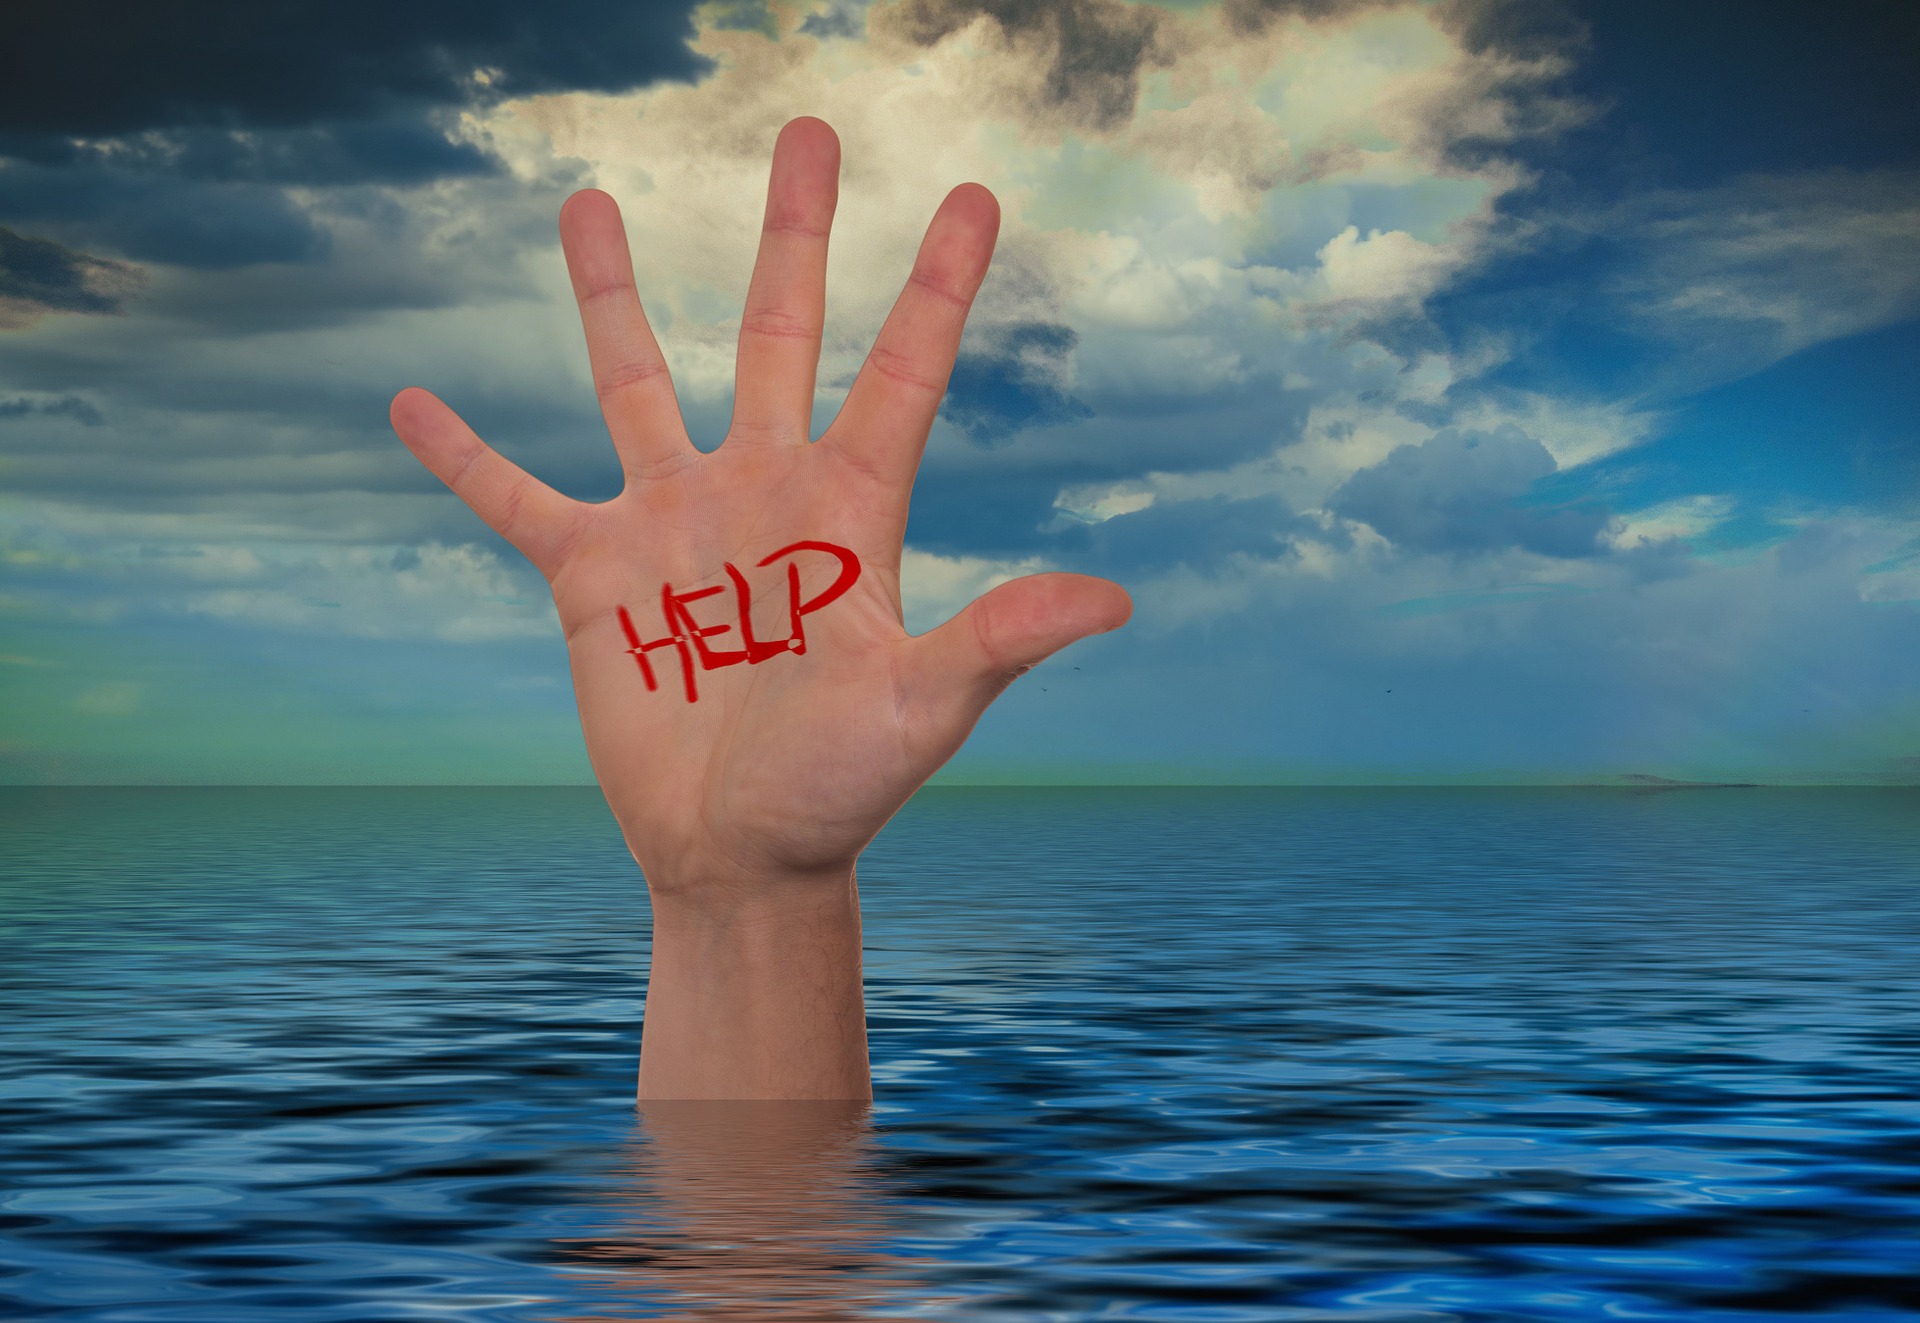 Hand with word "Help" written in red ink sticking out of the water